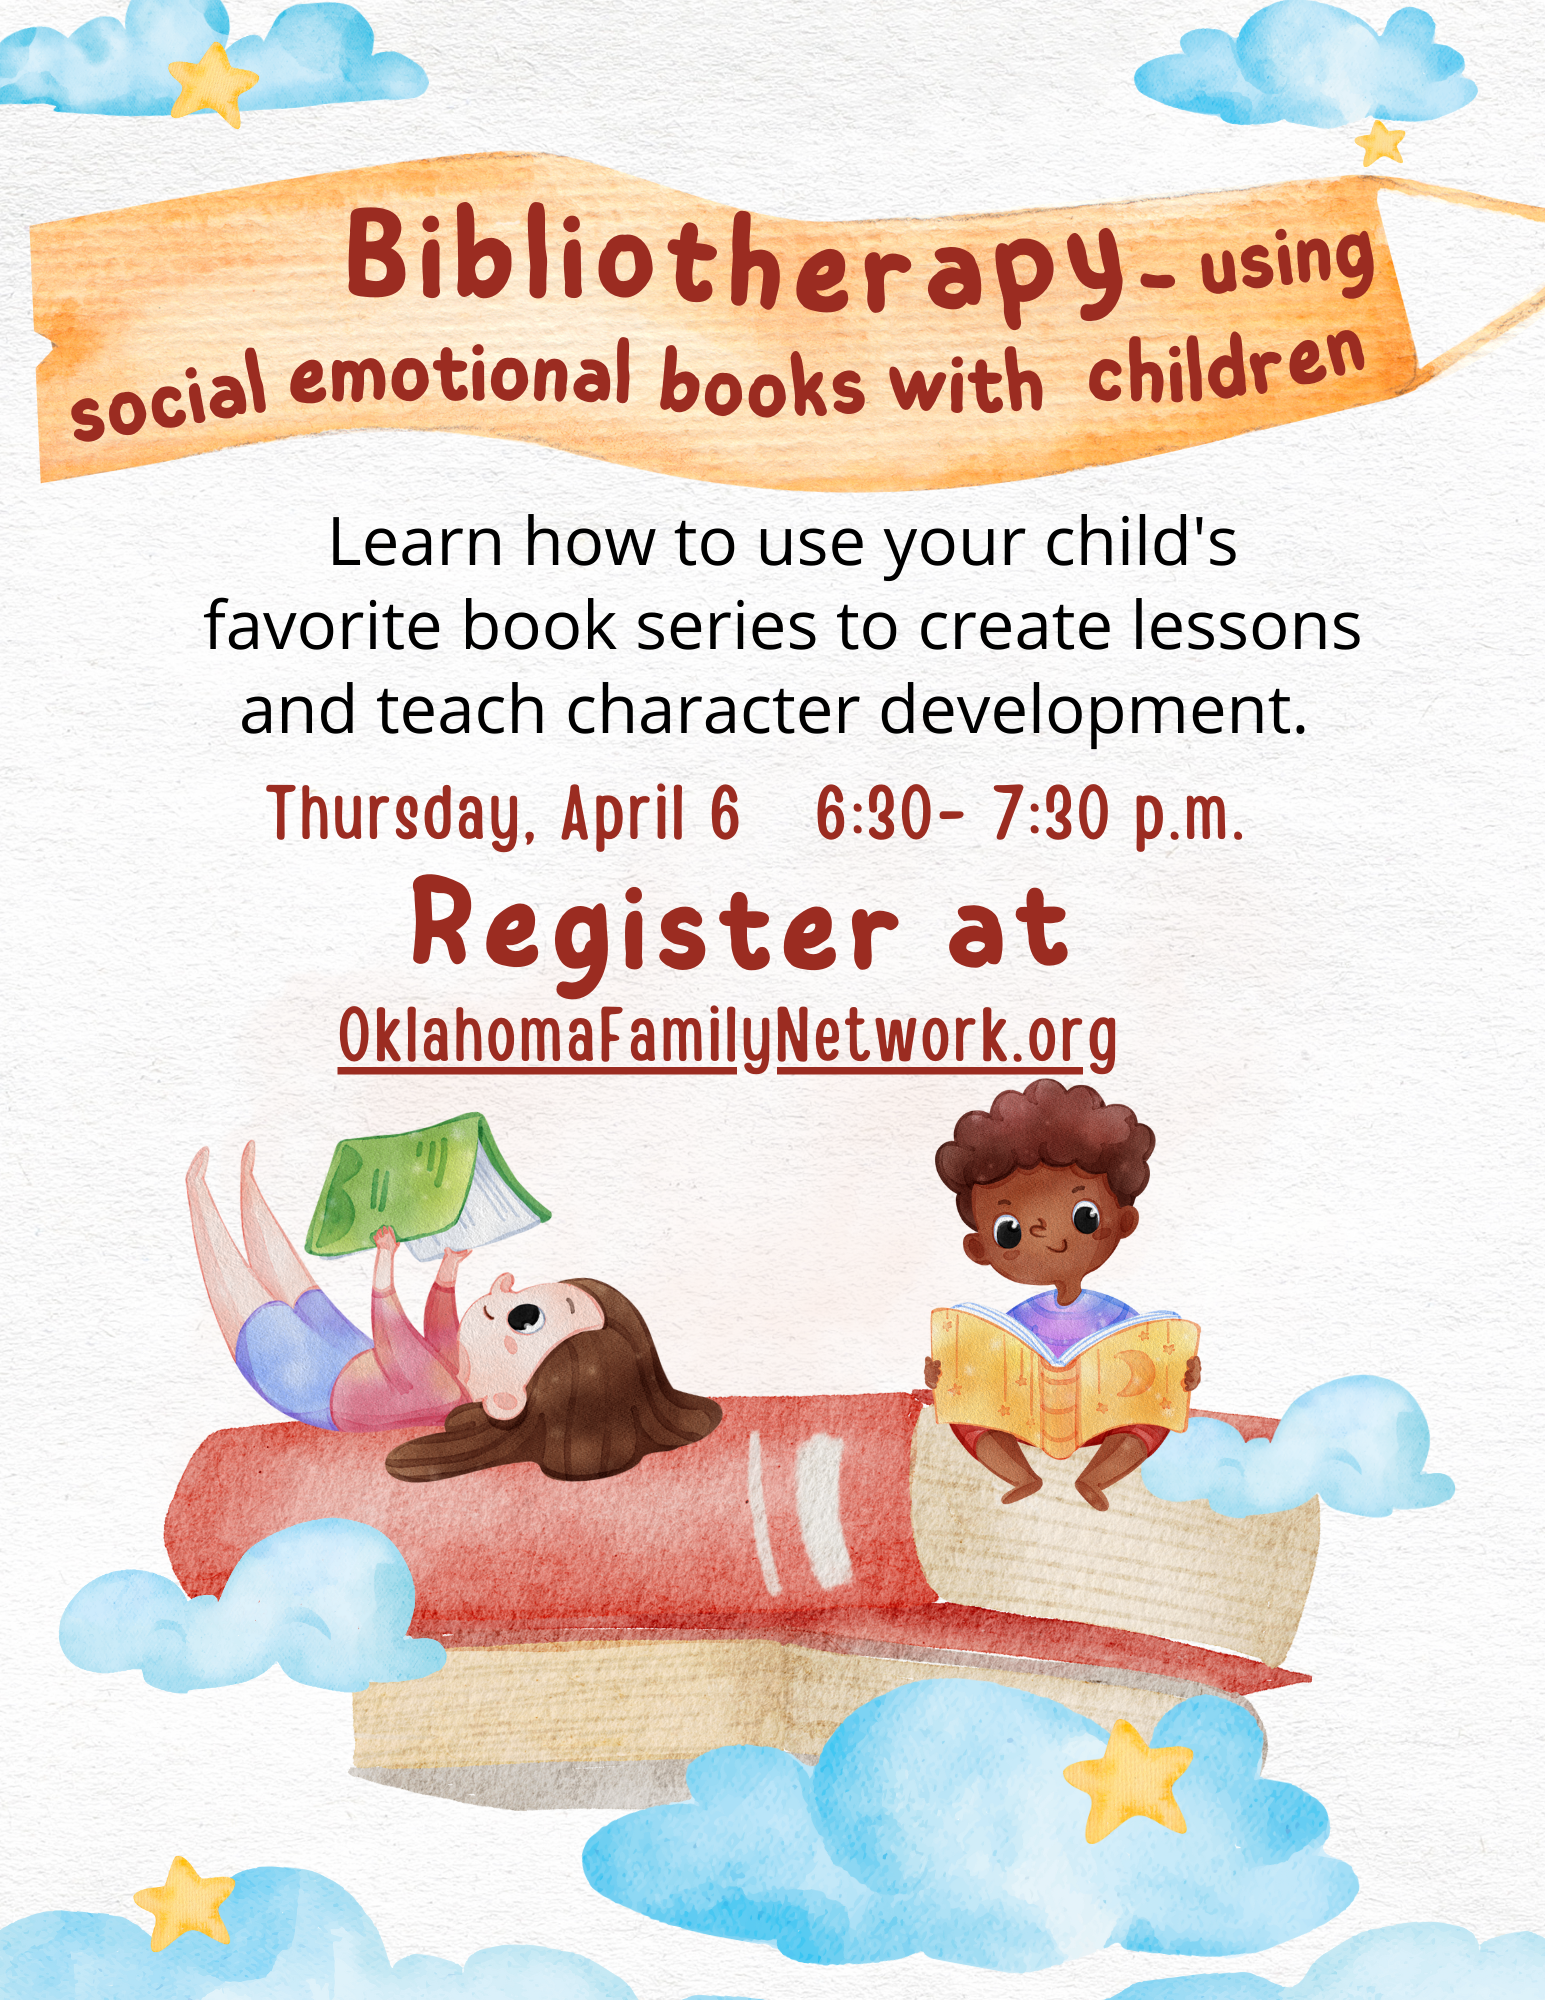 Bibliotherapy using social emotional books with children